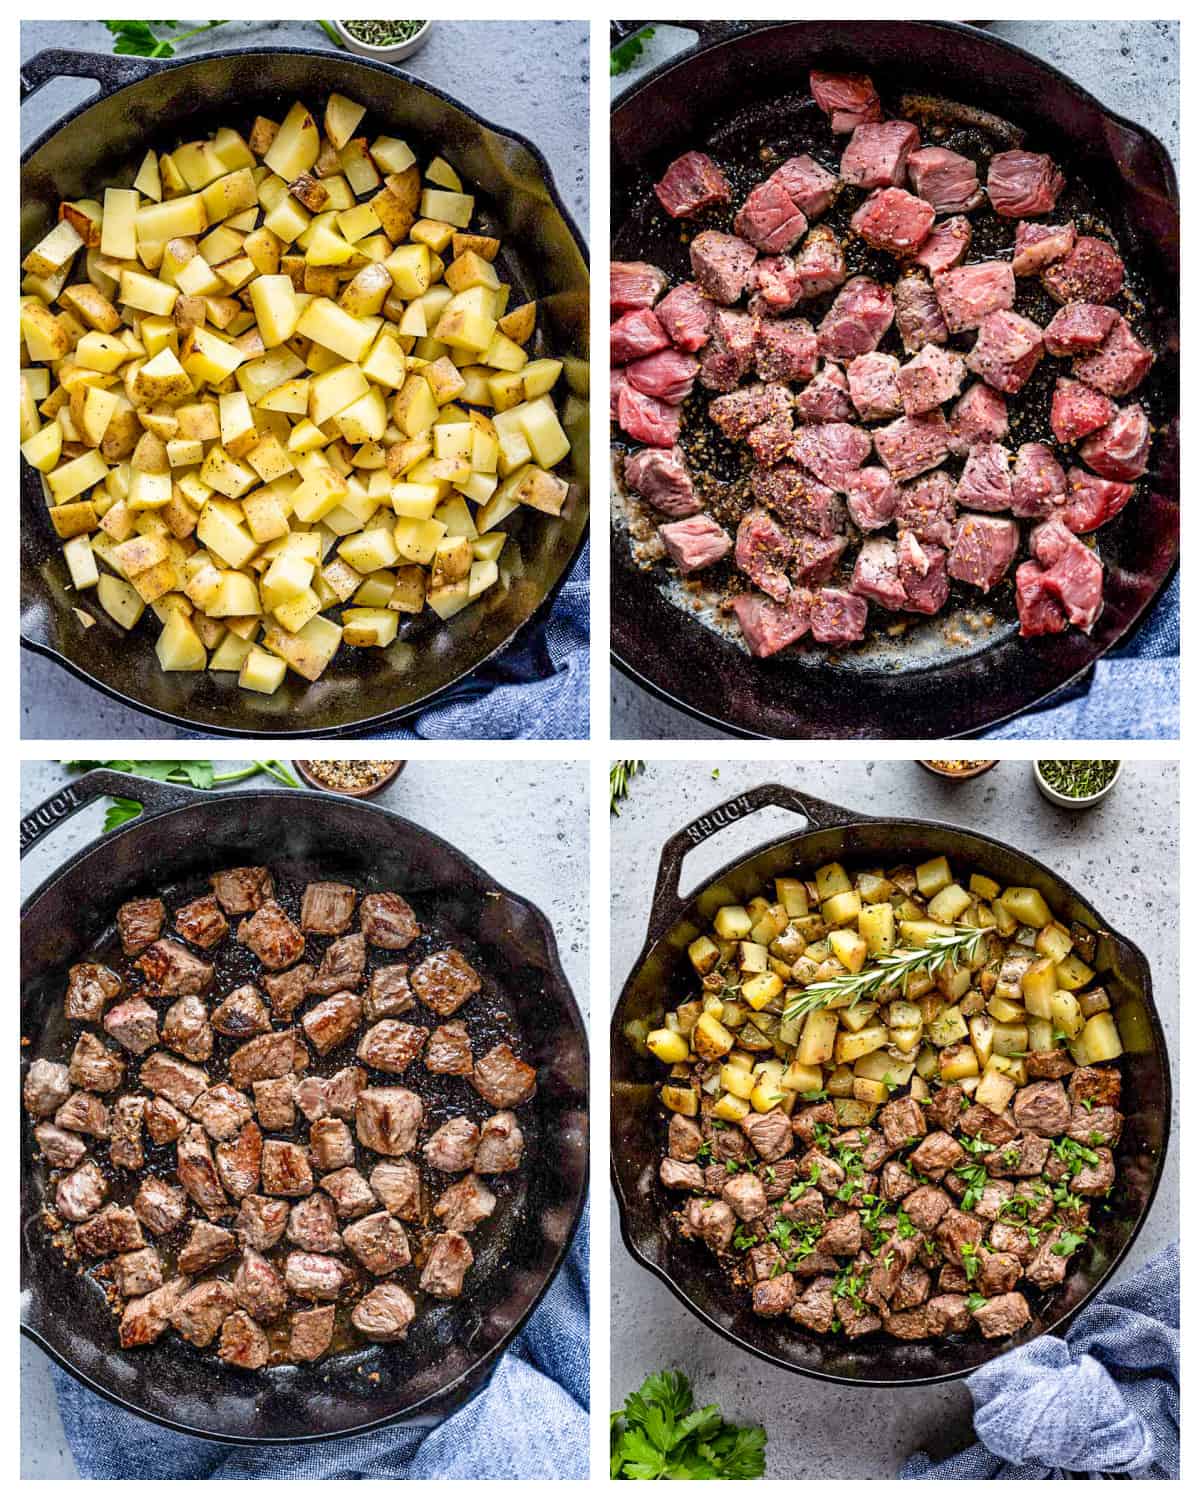 Step by step photos on how to make Steak Bite and Potatoes